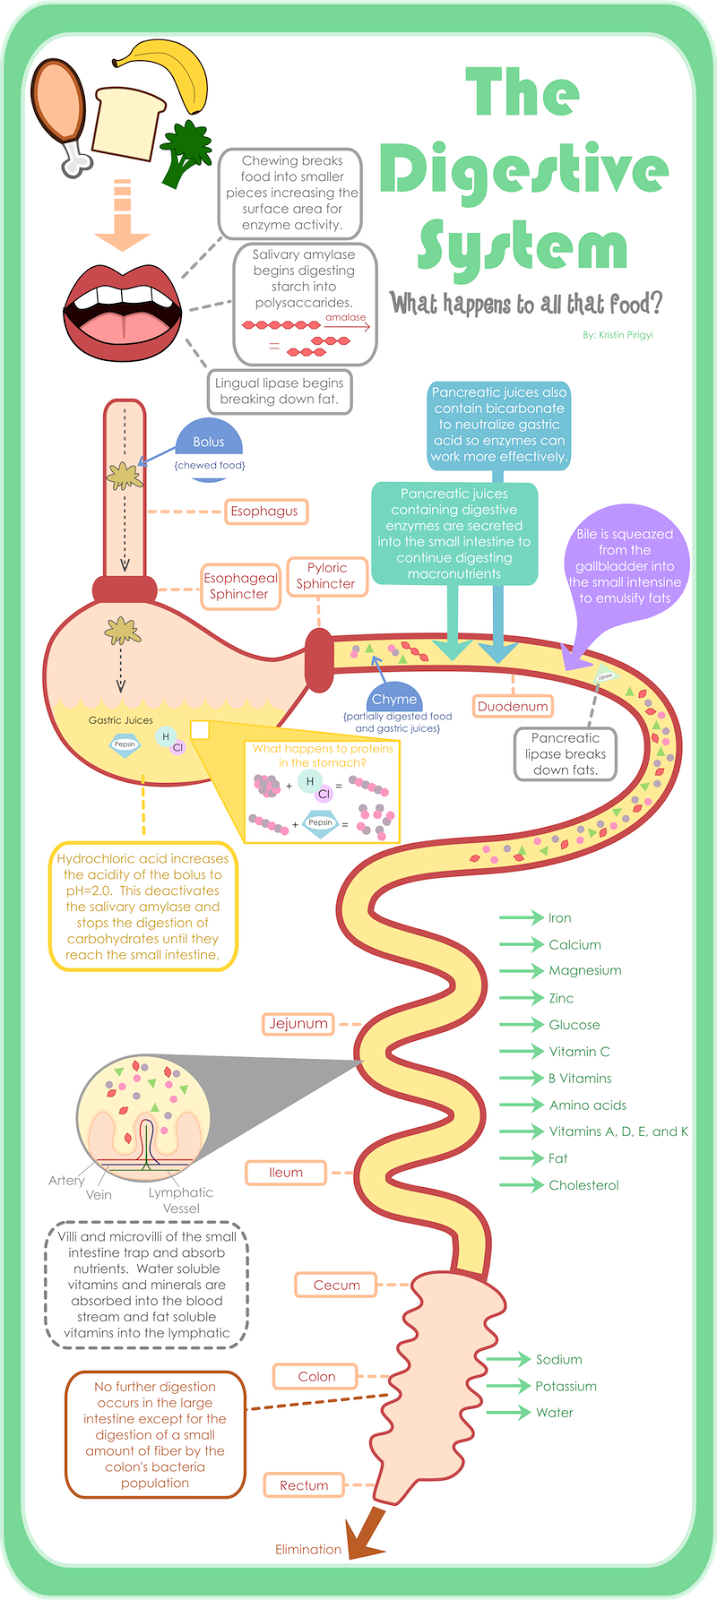 A Journey Through the Digestive System